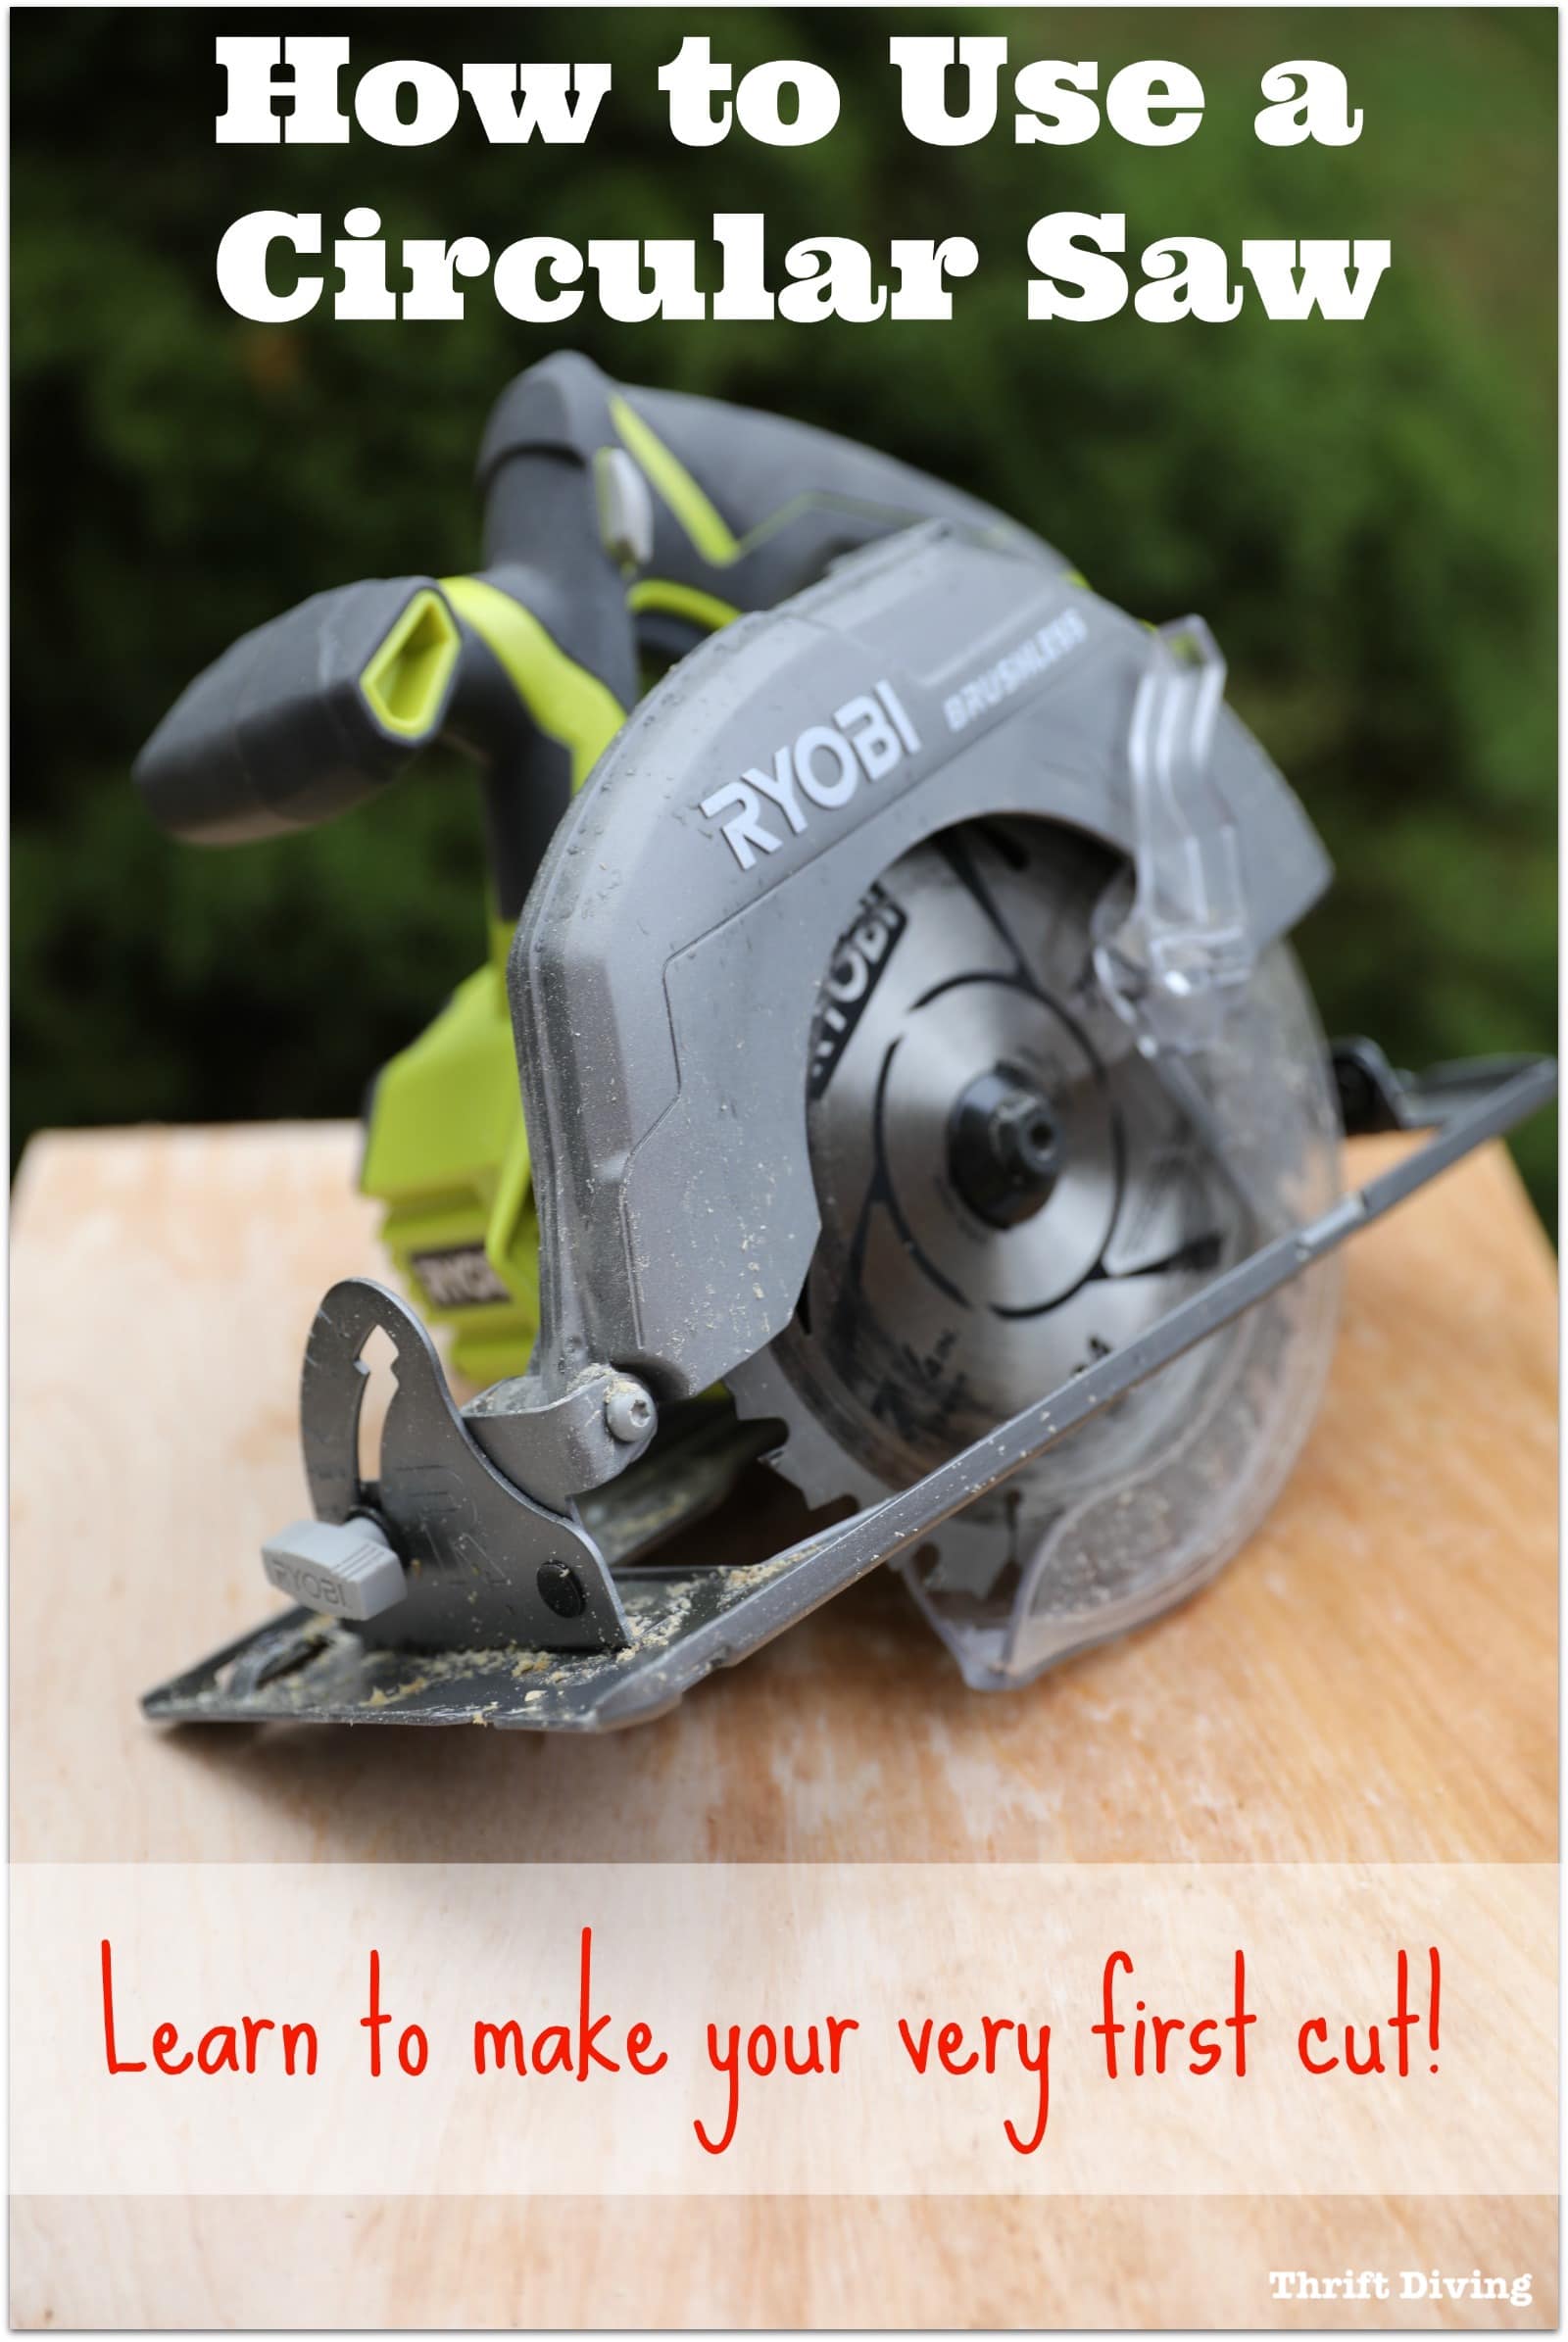 How to Use a Circular Saw - Learn how to make your very first cut without the fear or intimidation! - Thrift Diving